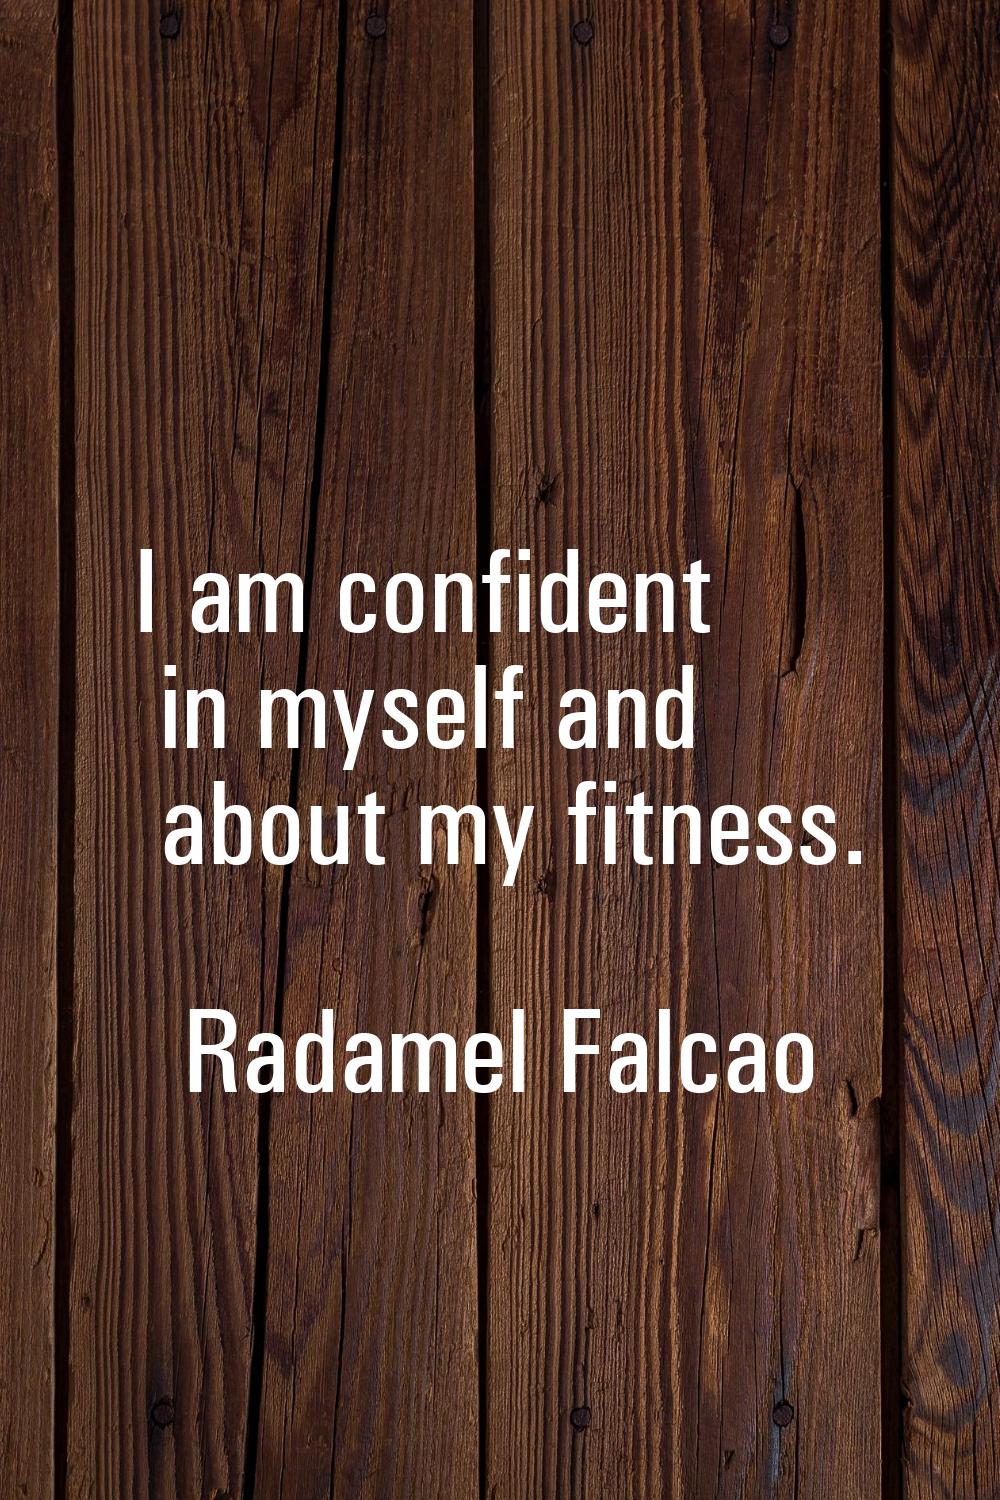 I am confident in myself and about my fitness.